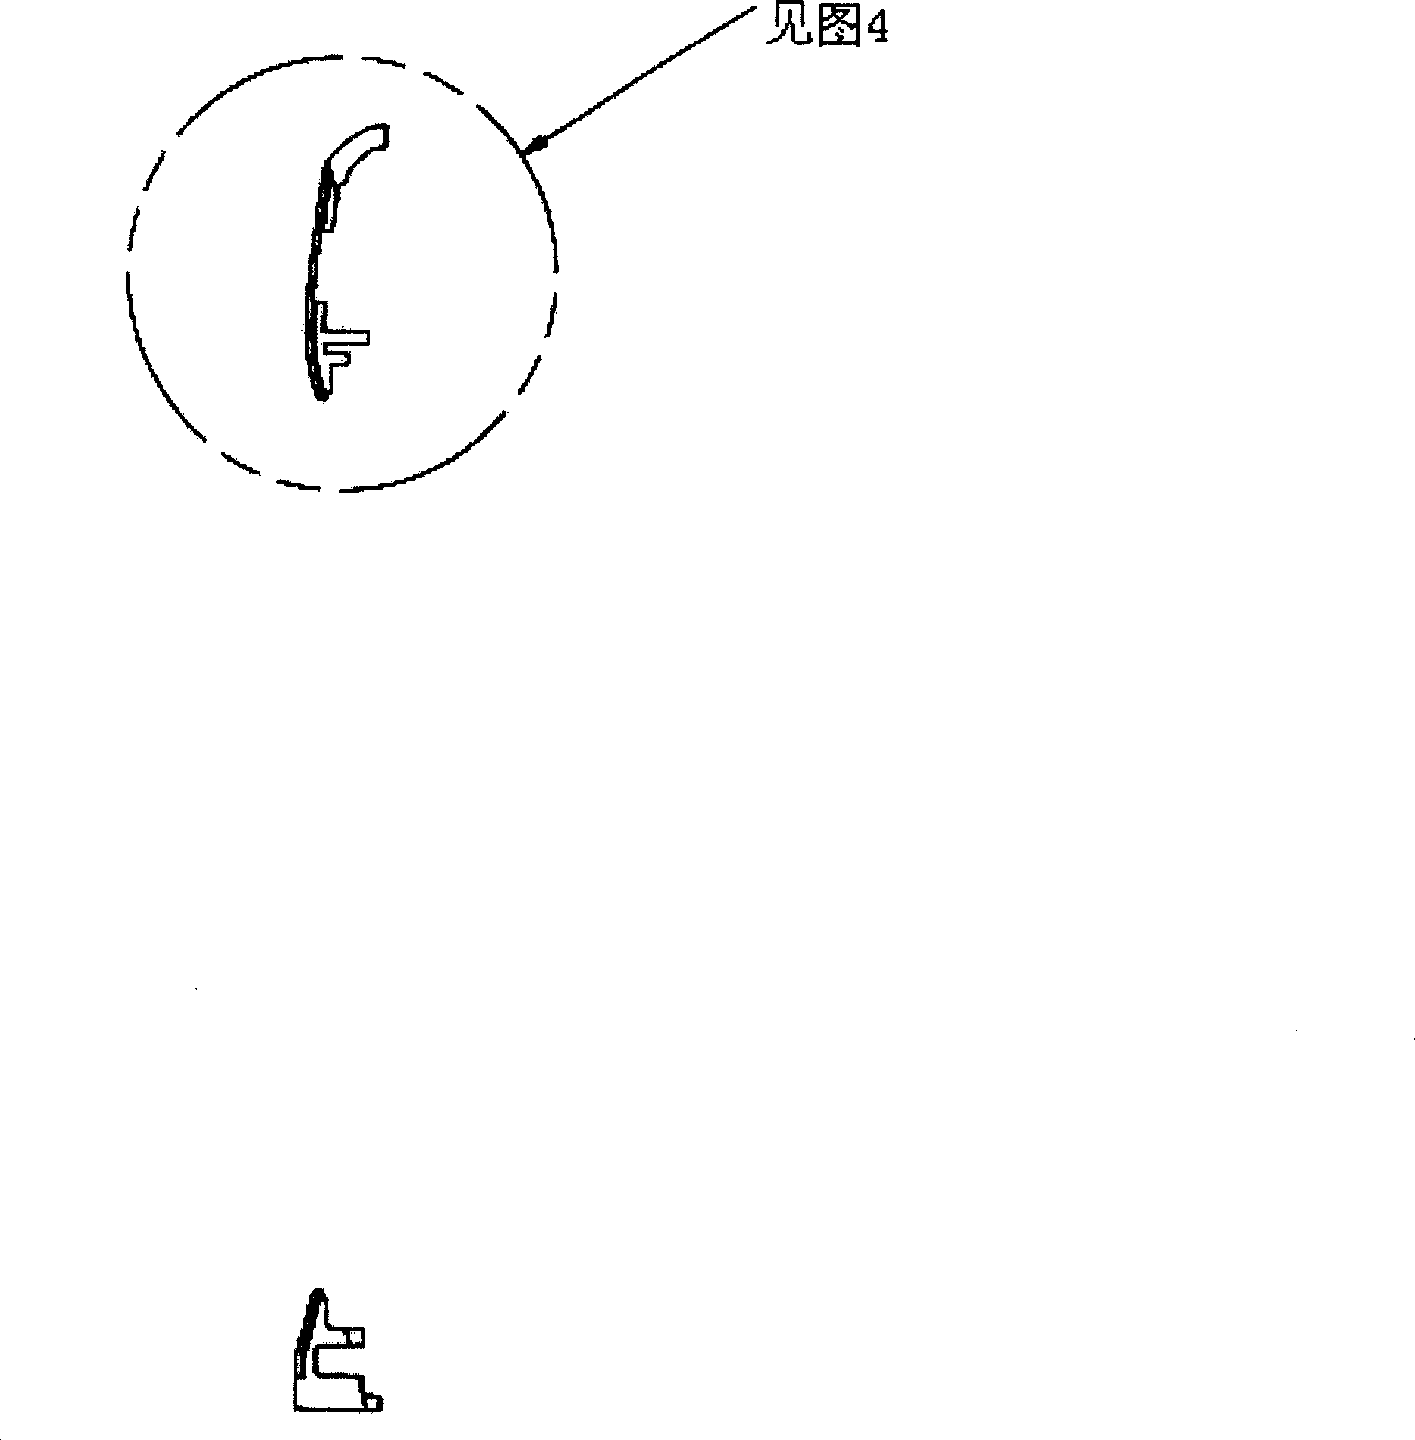 A grounding method of the outside metal parts of the electronic products